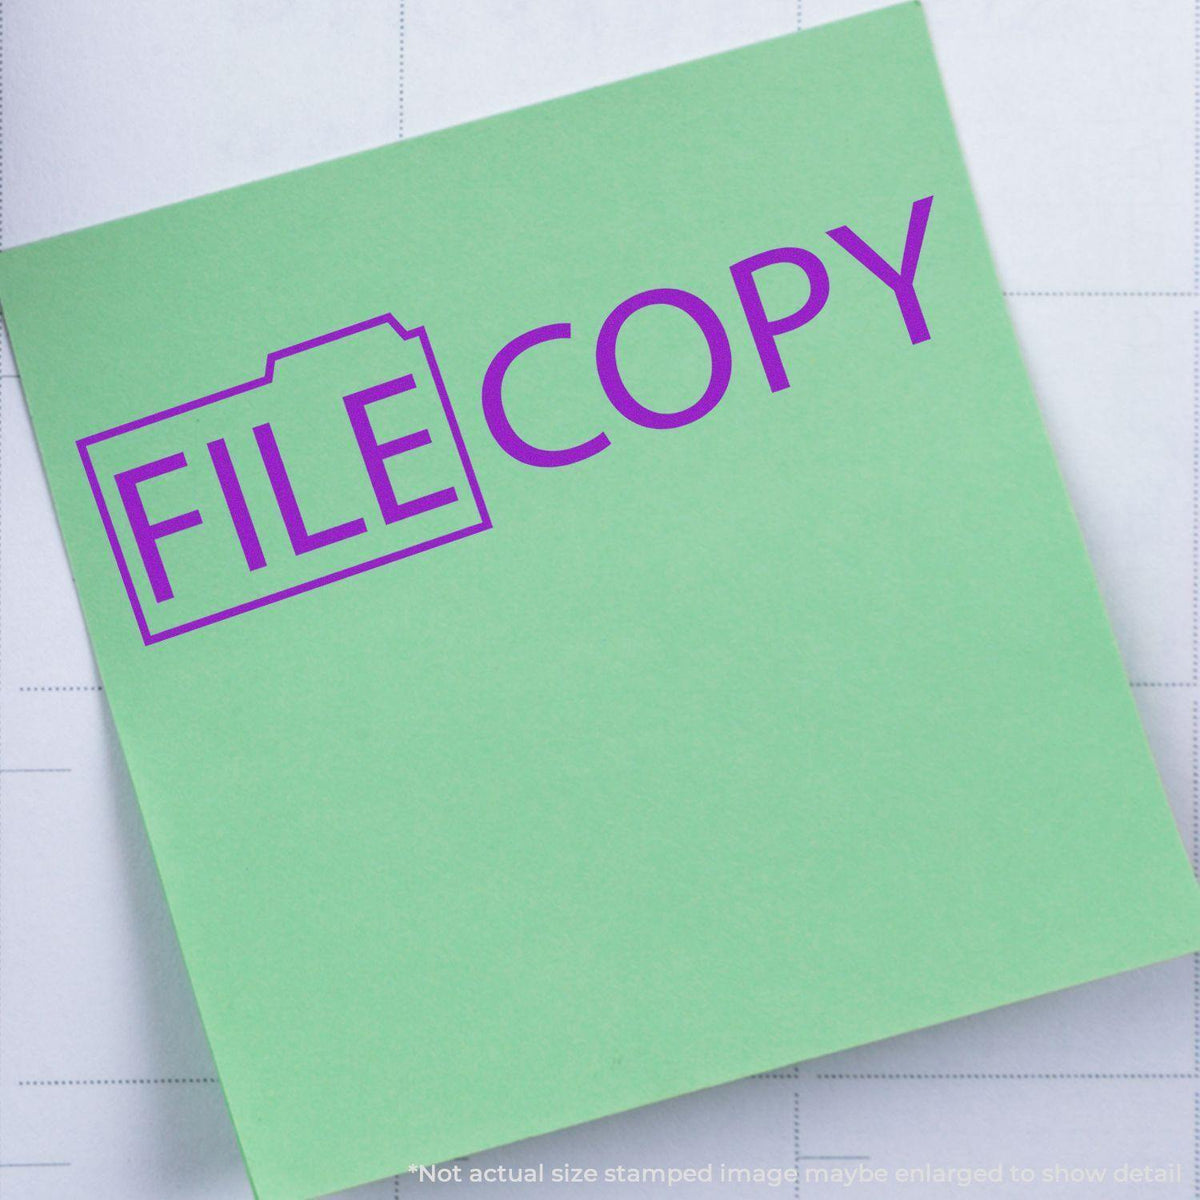 In Use File Copy with Folder Rubber Stamp Image